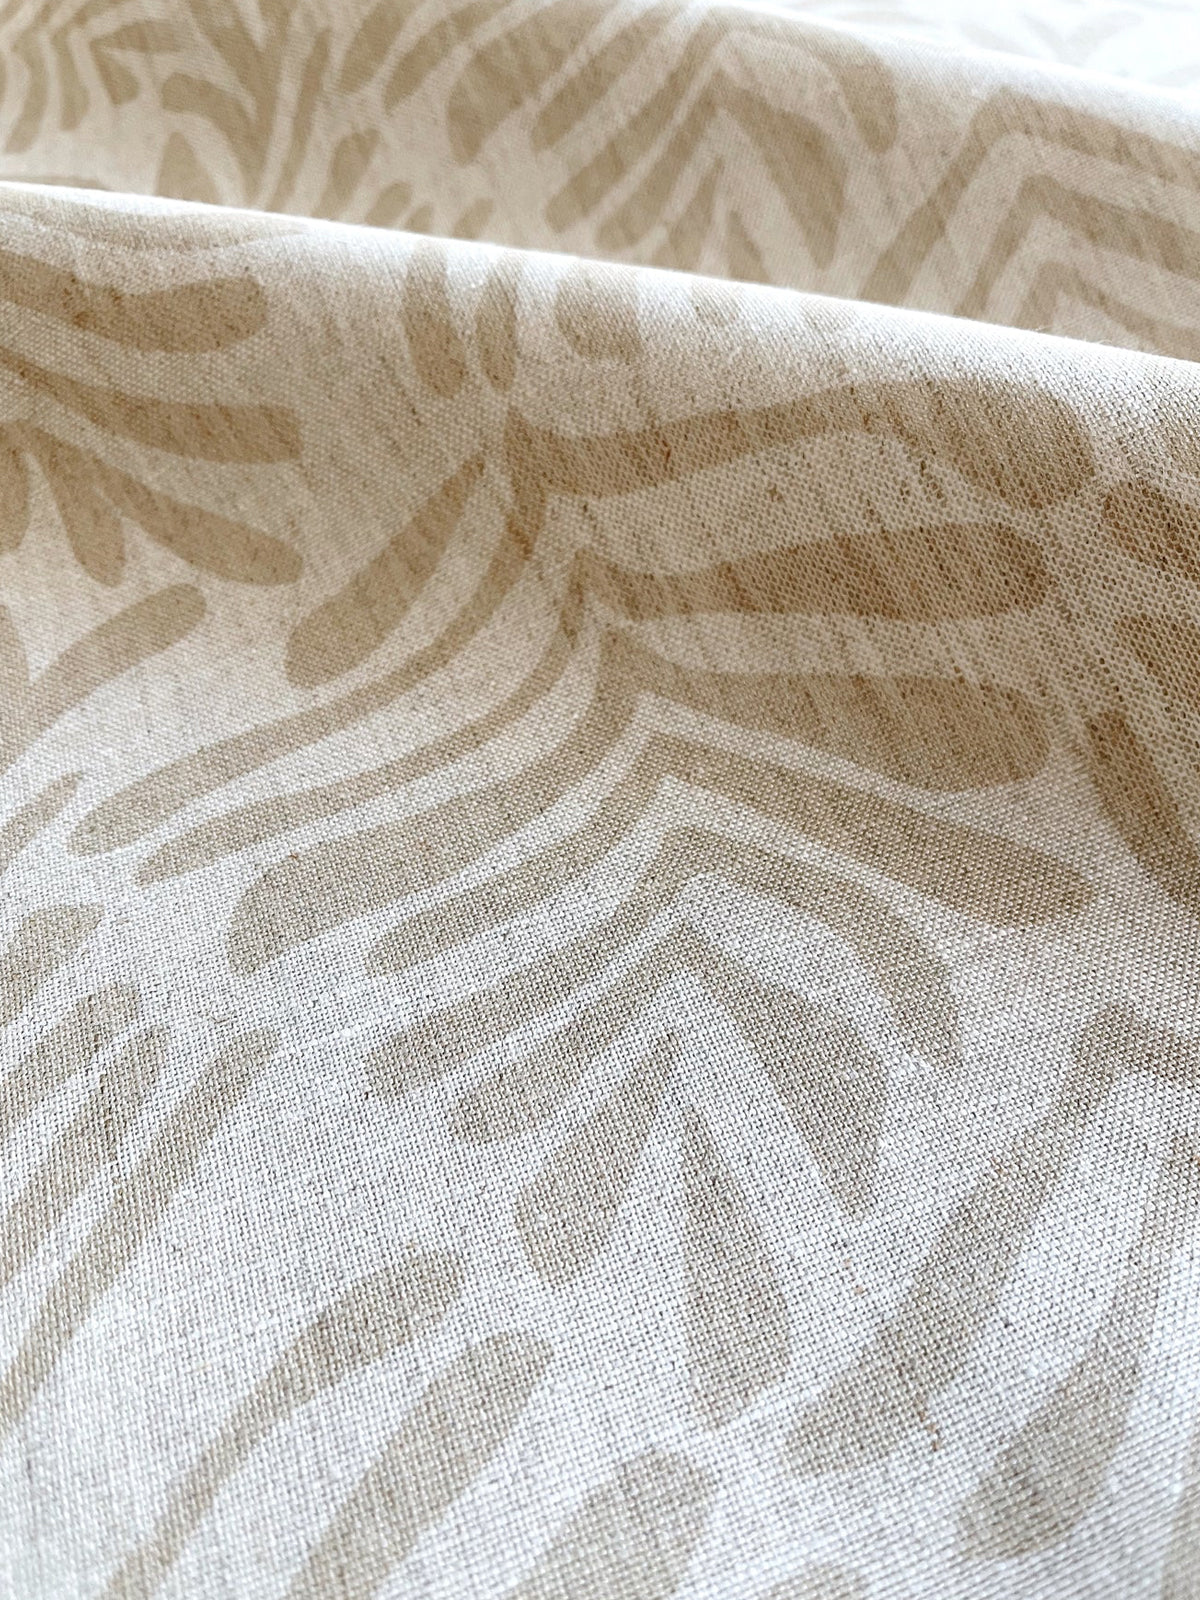 "Frond in Truffle" Pillow Cover by Emily Daws